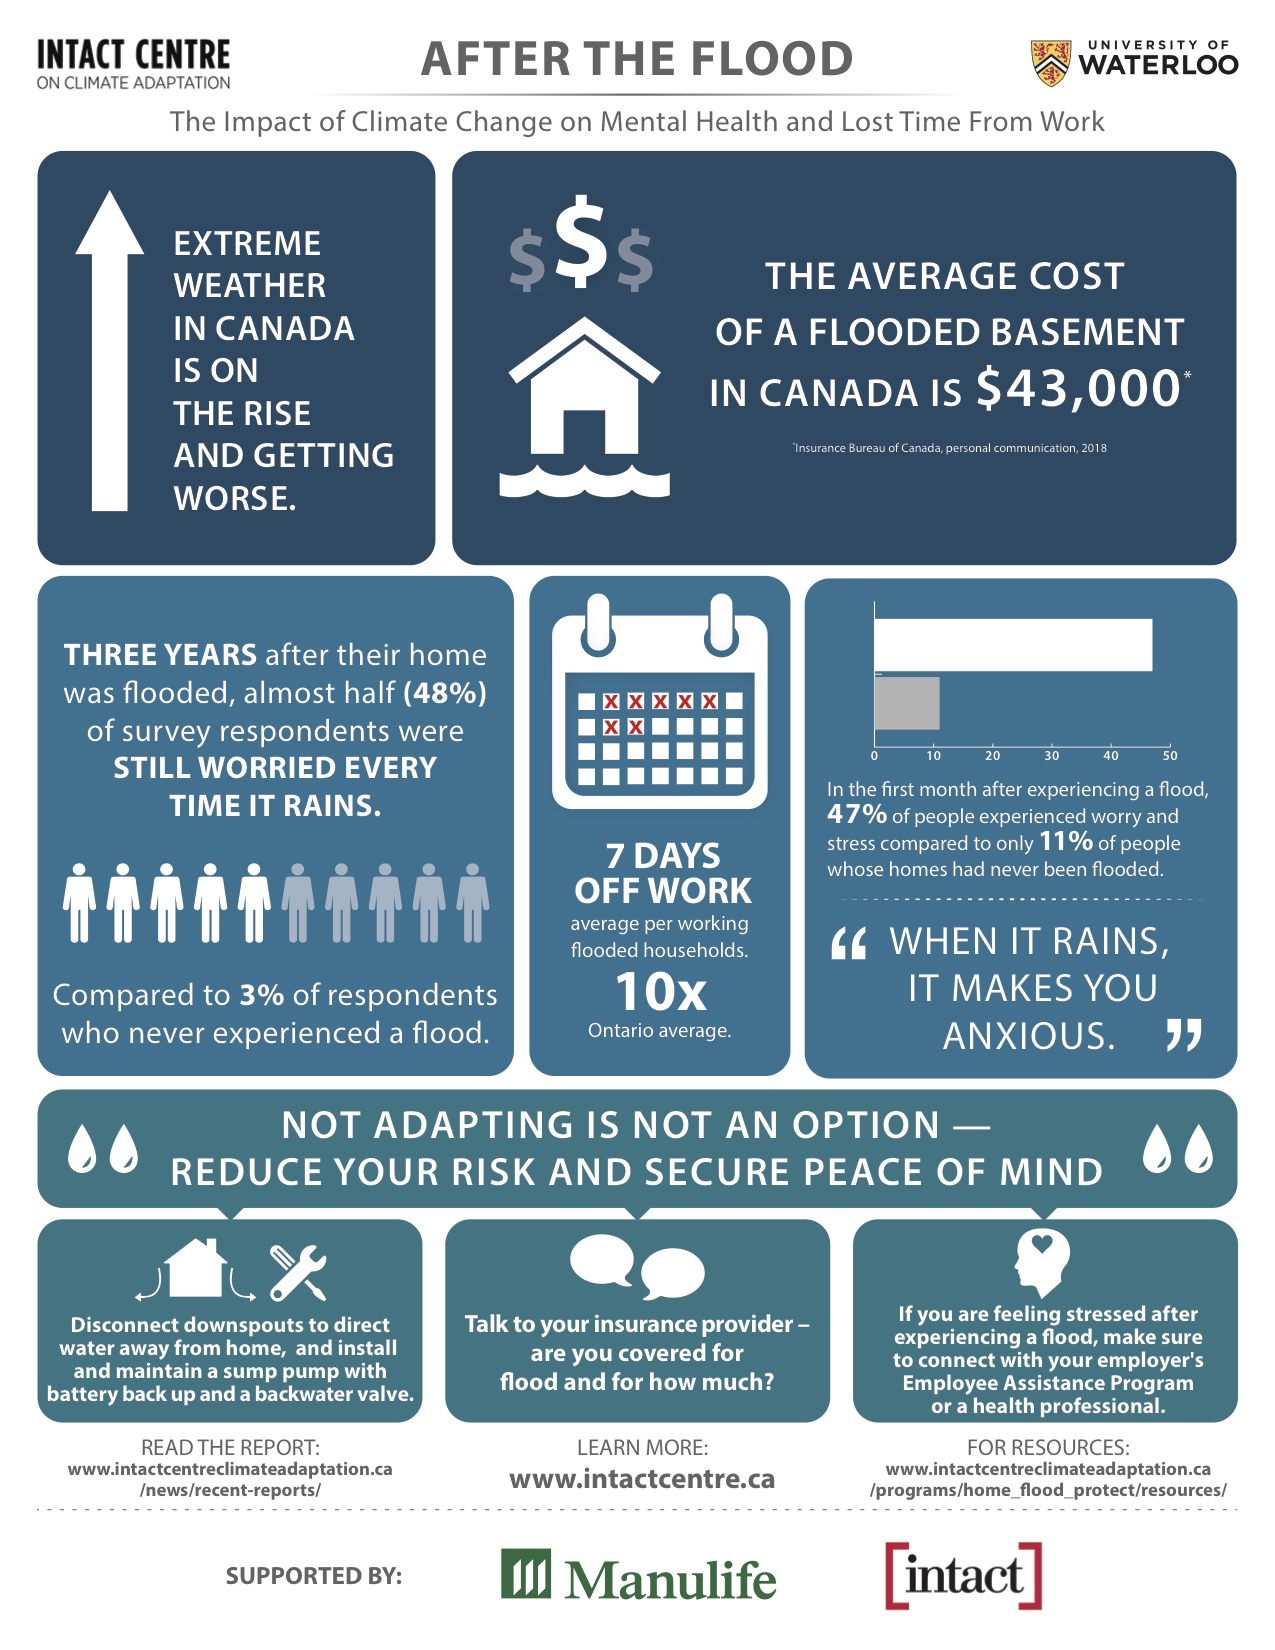 Infographic displaying key impacts of climate change on mental health and lost time from work